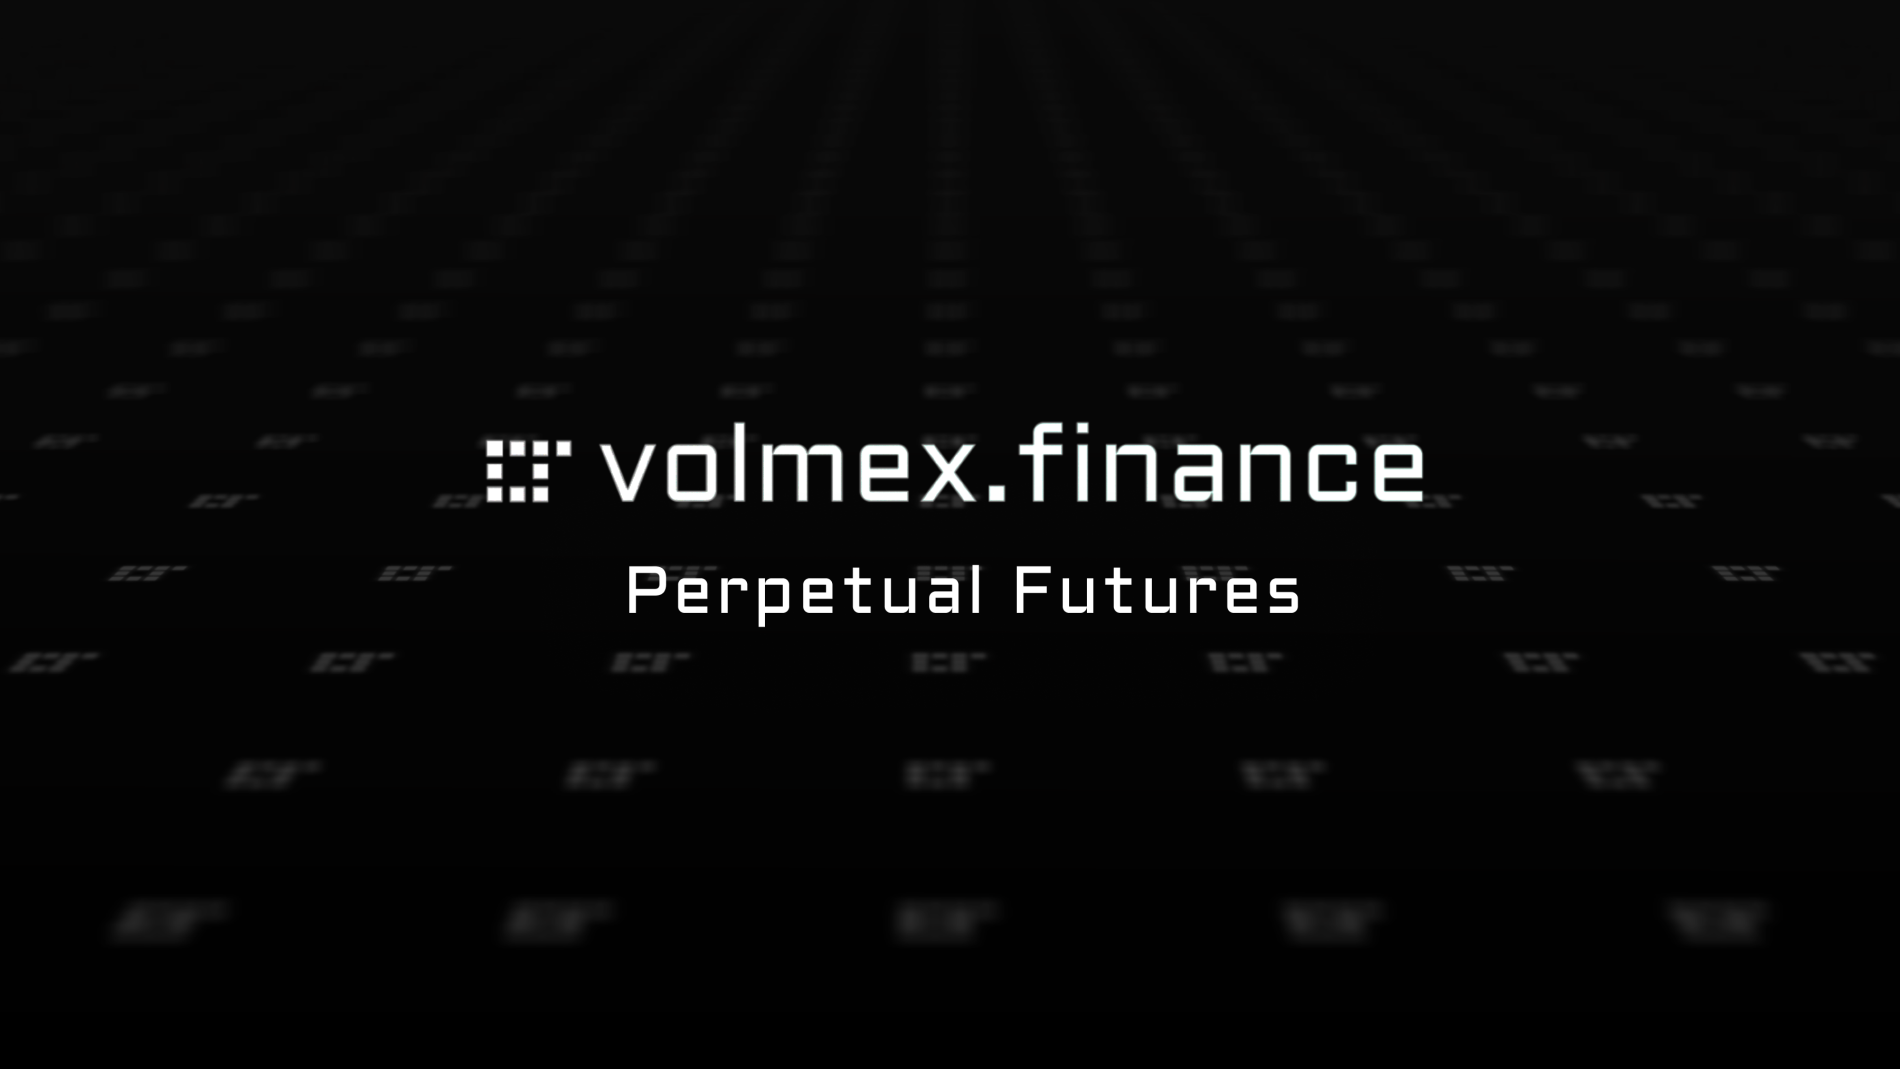 Introducing Volmex Perpetual Futures, Testnet Live on Coinbase-Backed Base Network